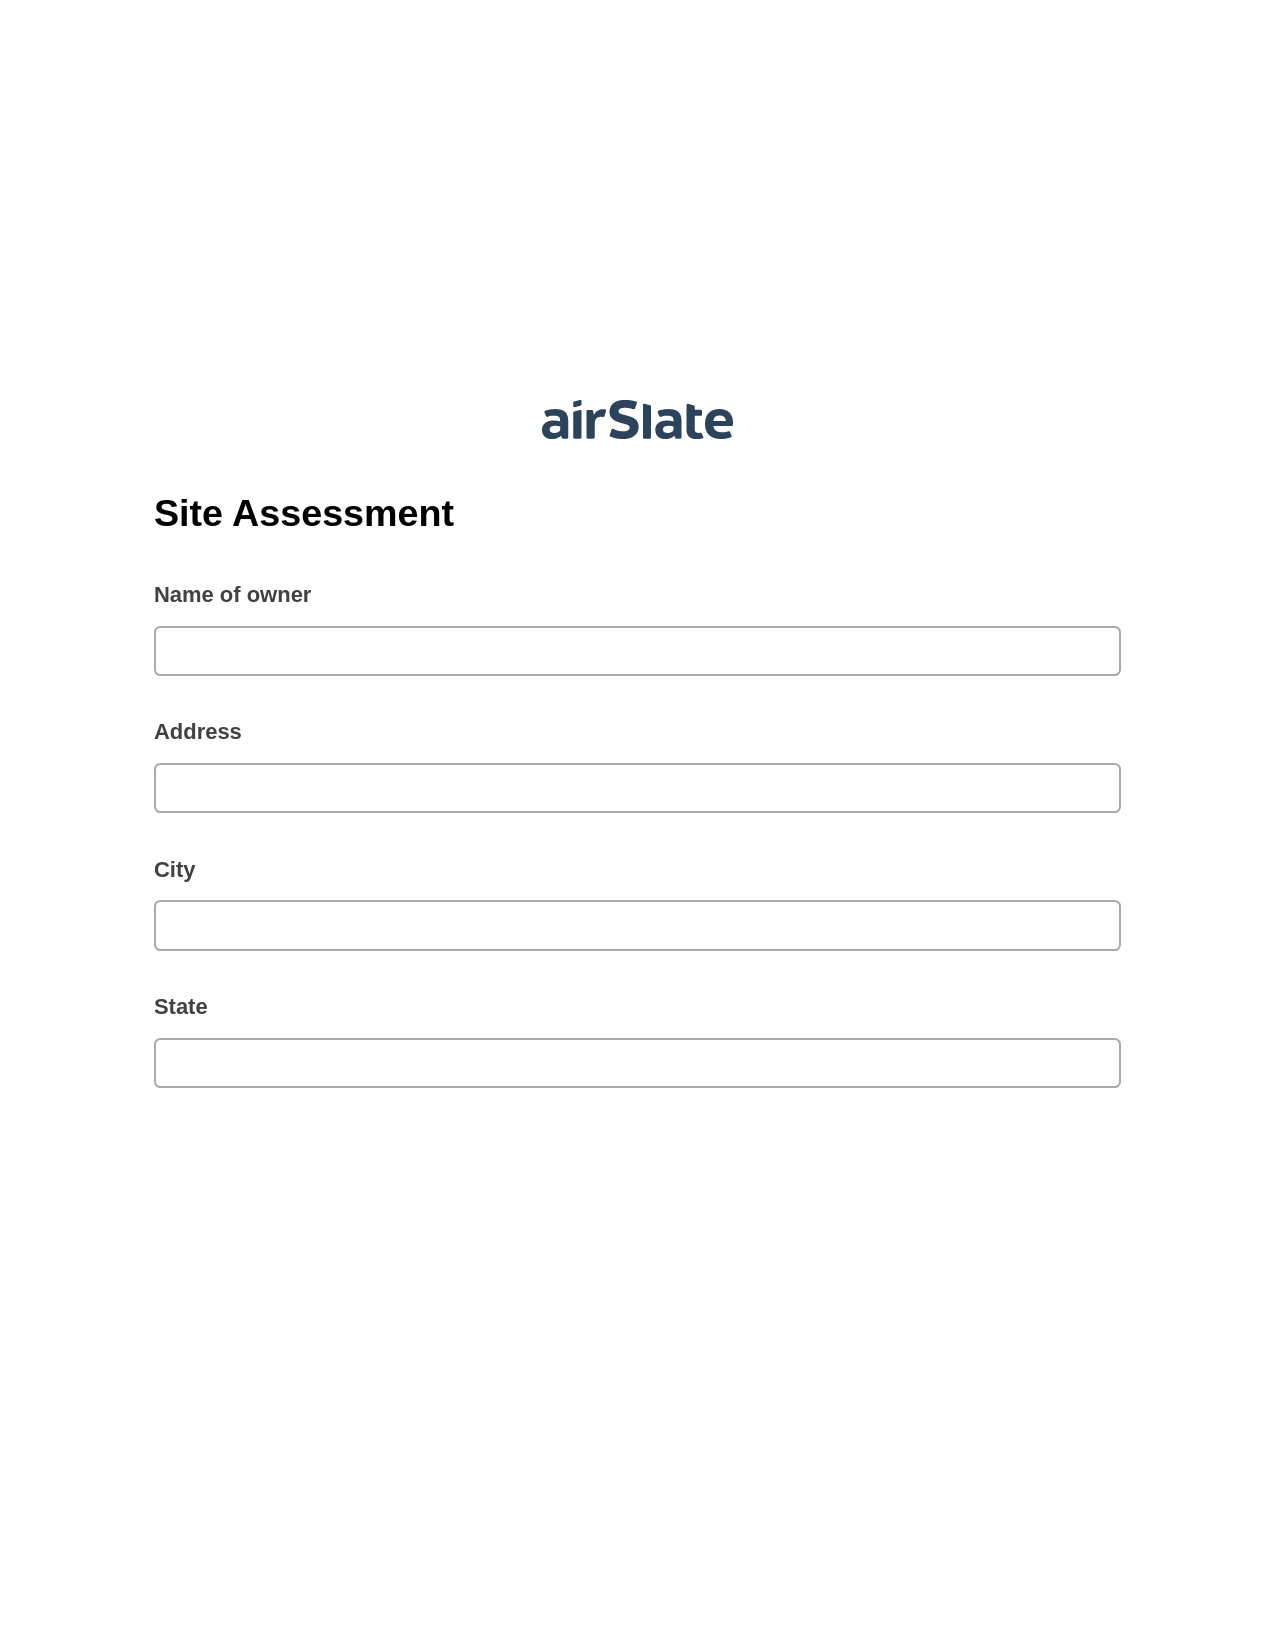 Site Assessment Pre-fill Slate from MS Dynamics 365 Records Bot, Revoke Access Bot, Text Message Notification Postfinish Bot